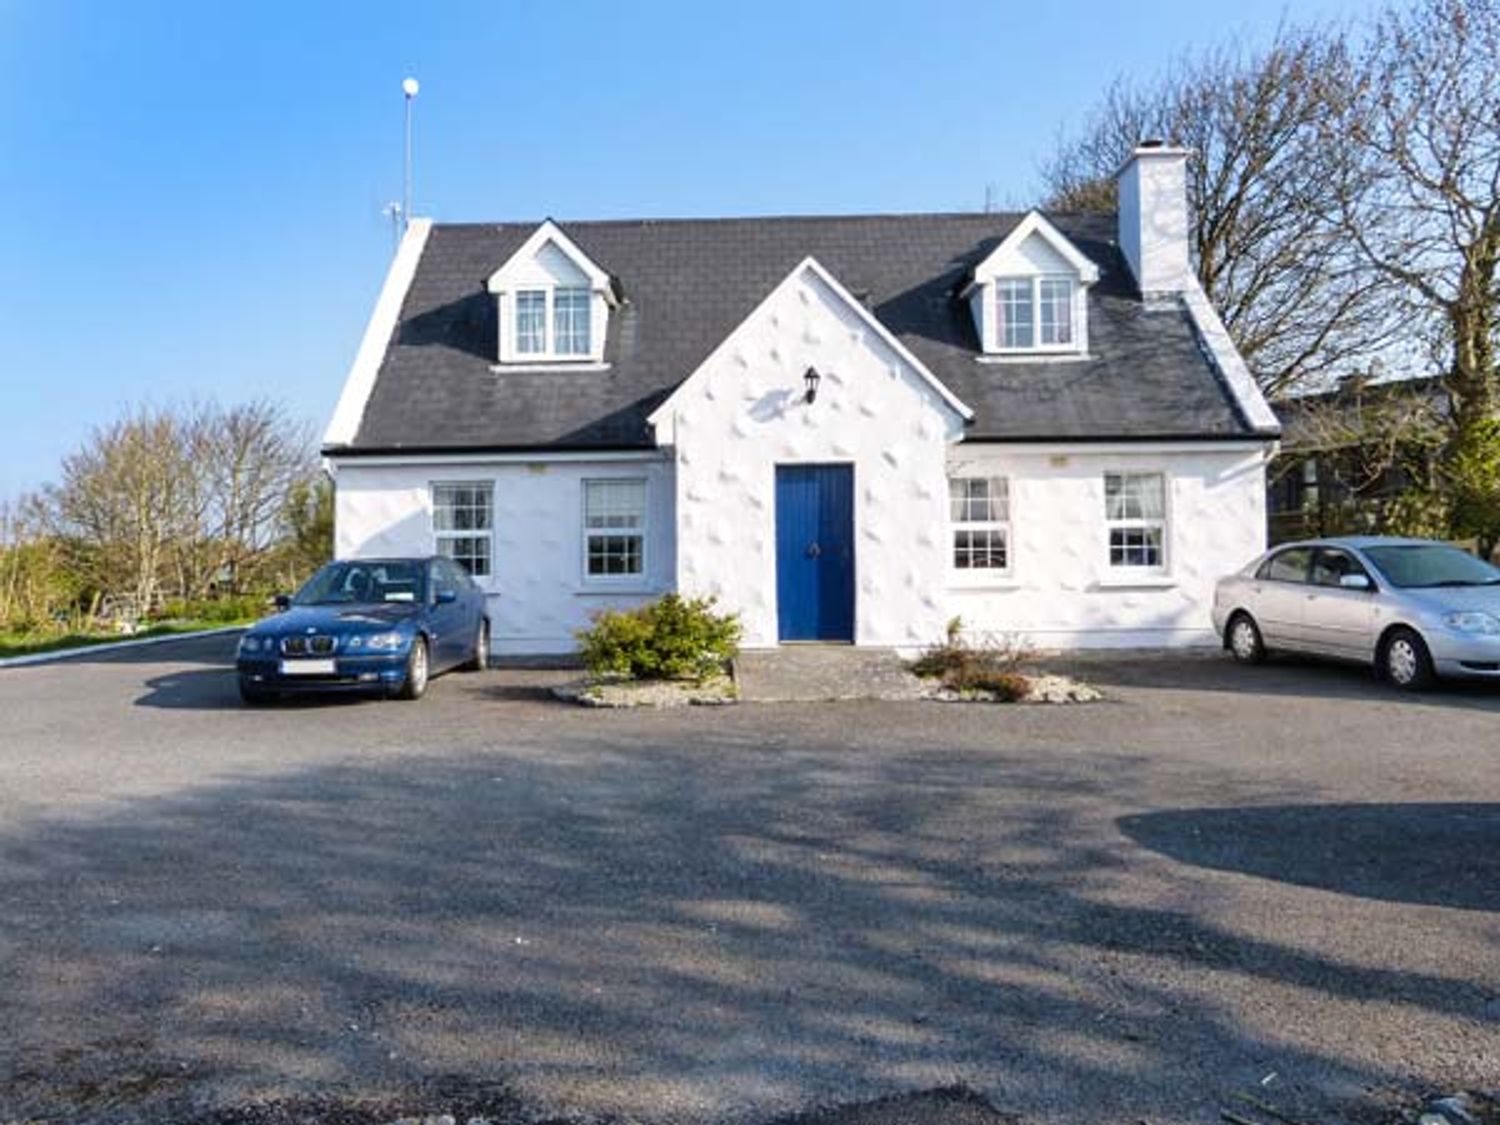 No.1 Apt, Brandy Harbour Cottage - Shancroagh & County Galway - 951117 - photo 1